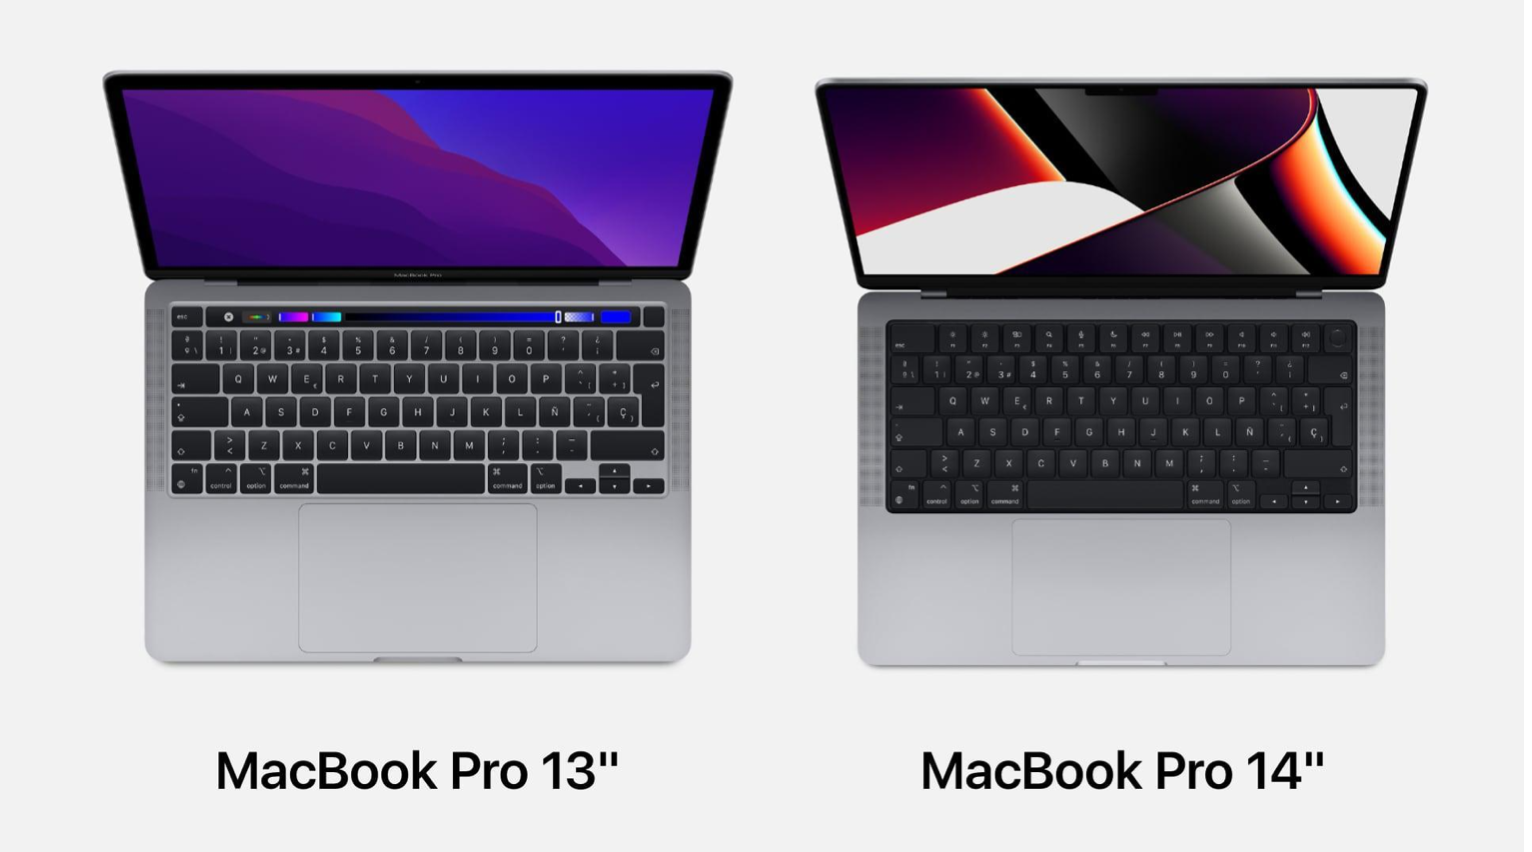 MacBook Pro 13 inch vs MacBook Pro 14 inch: What are the differences?